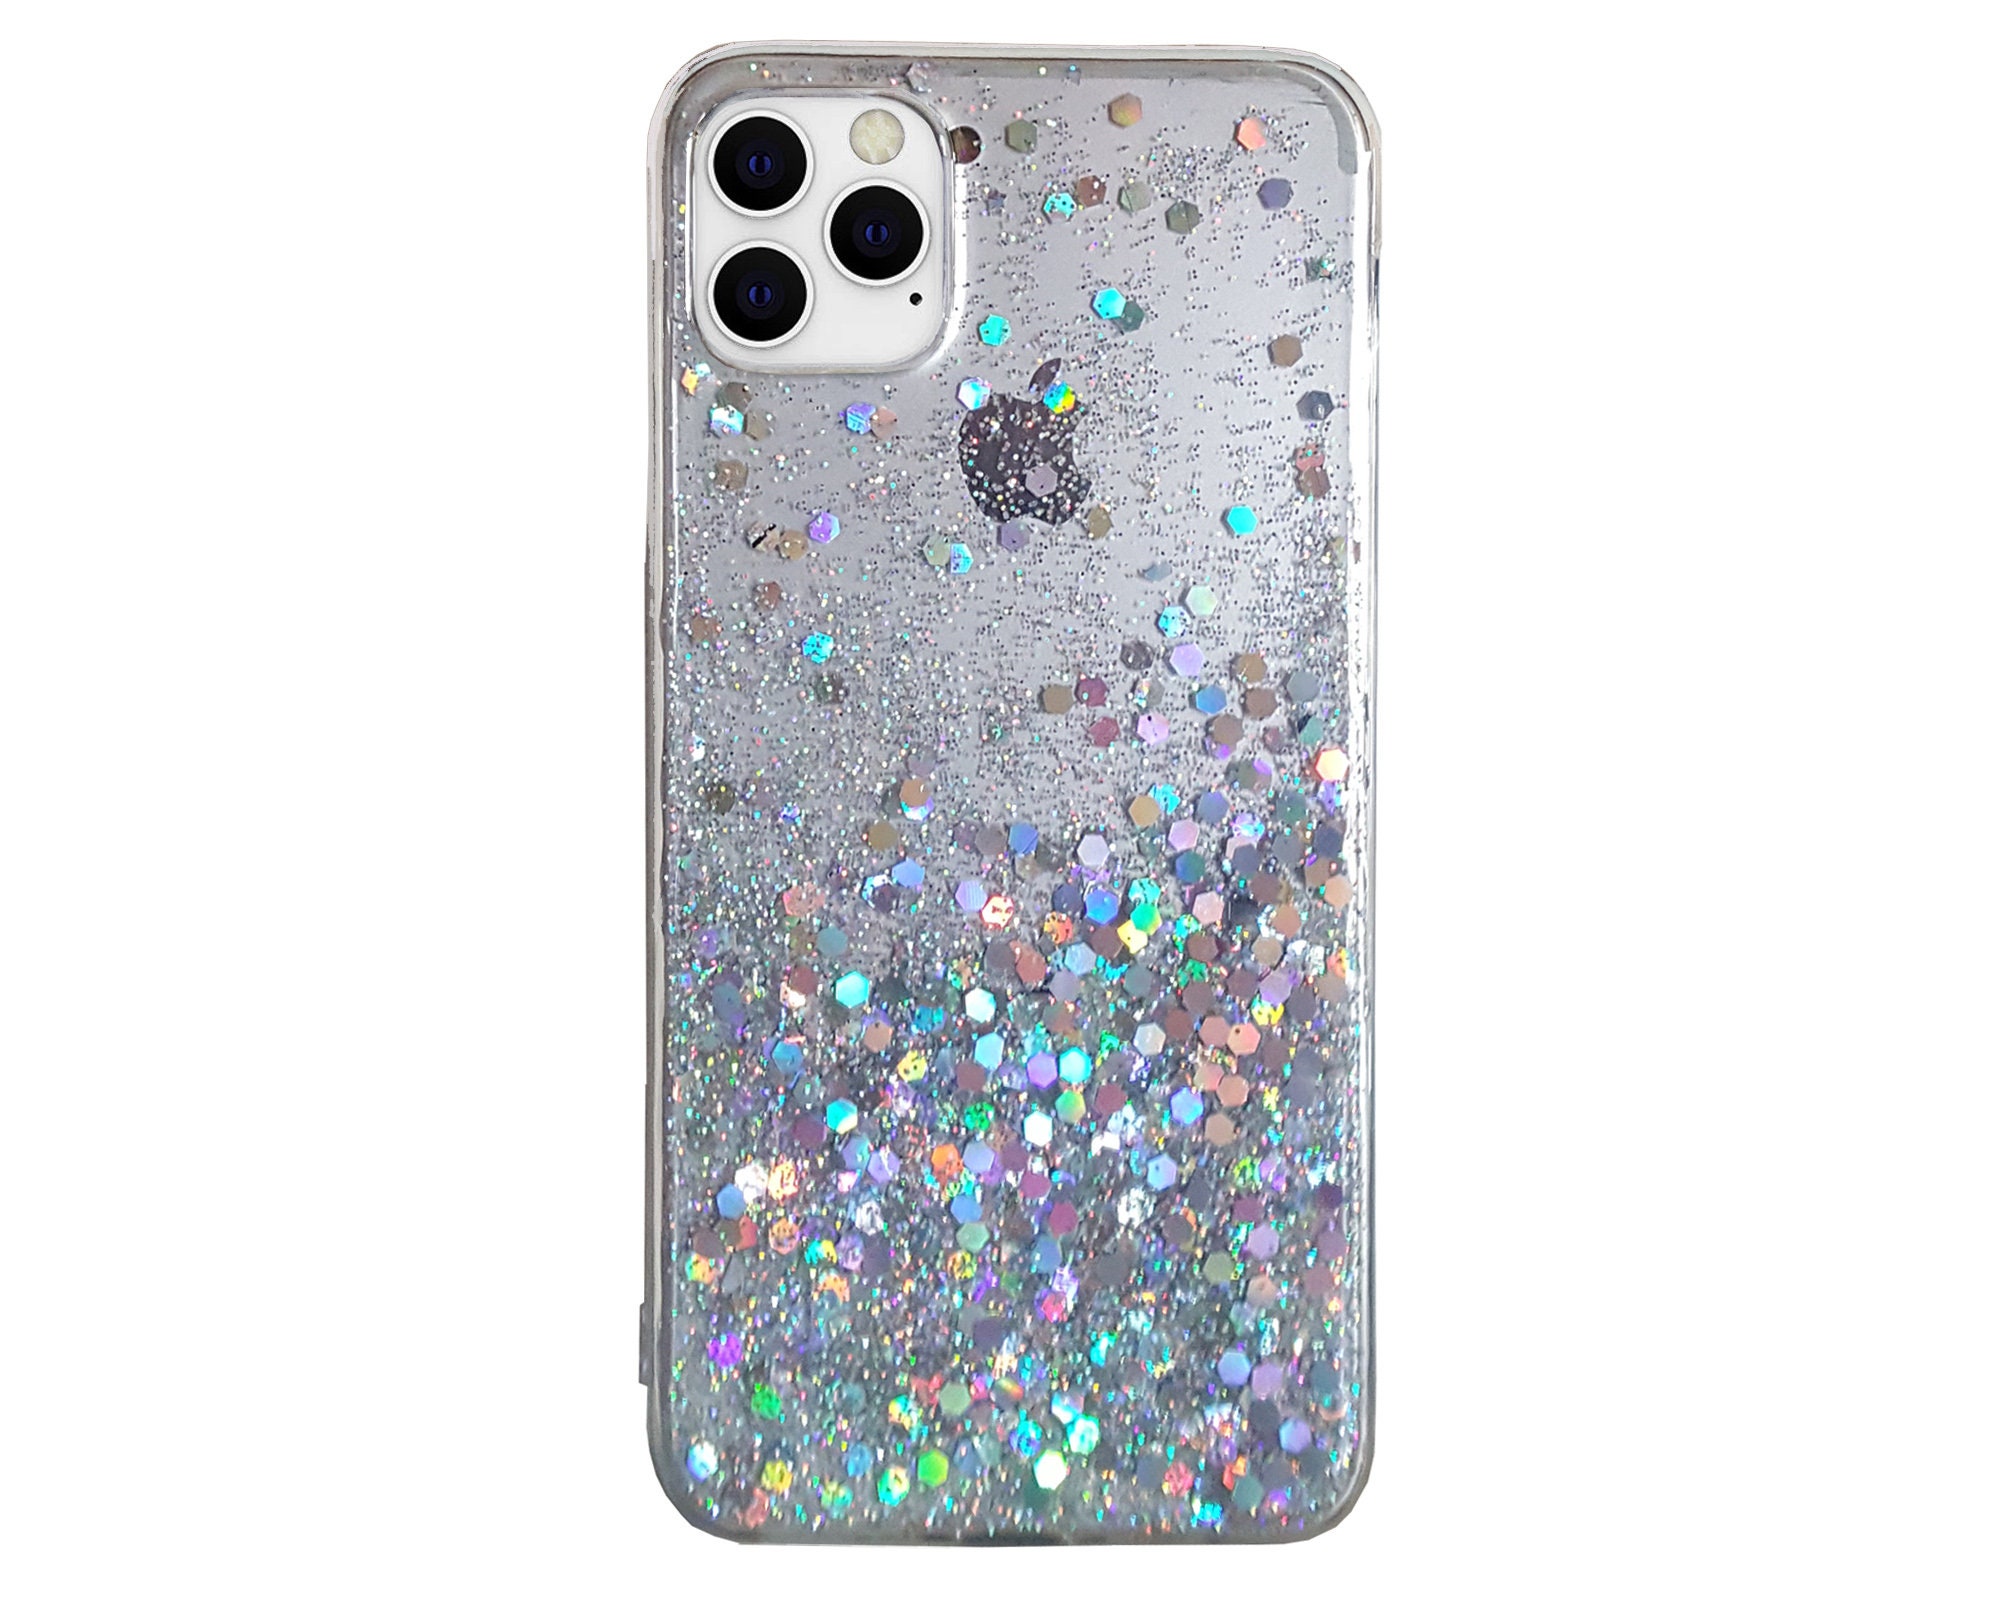 Xpression Apple iPhone 11 Pro Max Phone Case Holographic Laser Beam Sparkle Bling Reflective Psychedelic Rainbow Super Slim Soft TPU Hybrid Cover Glow Shiny